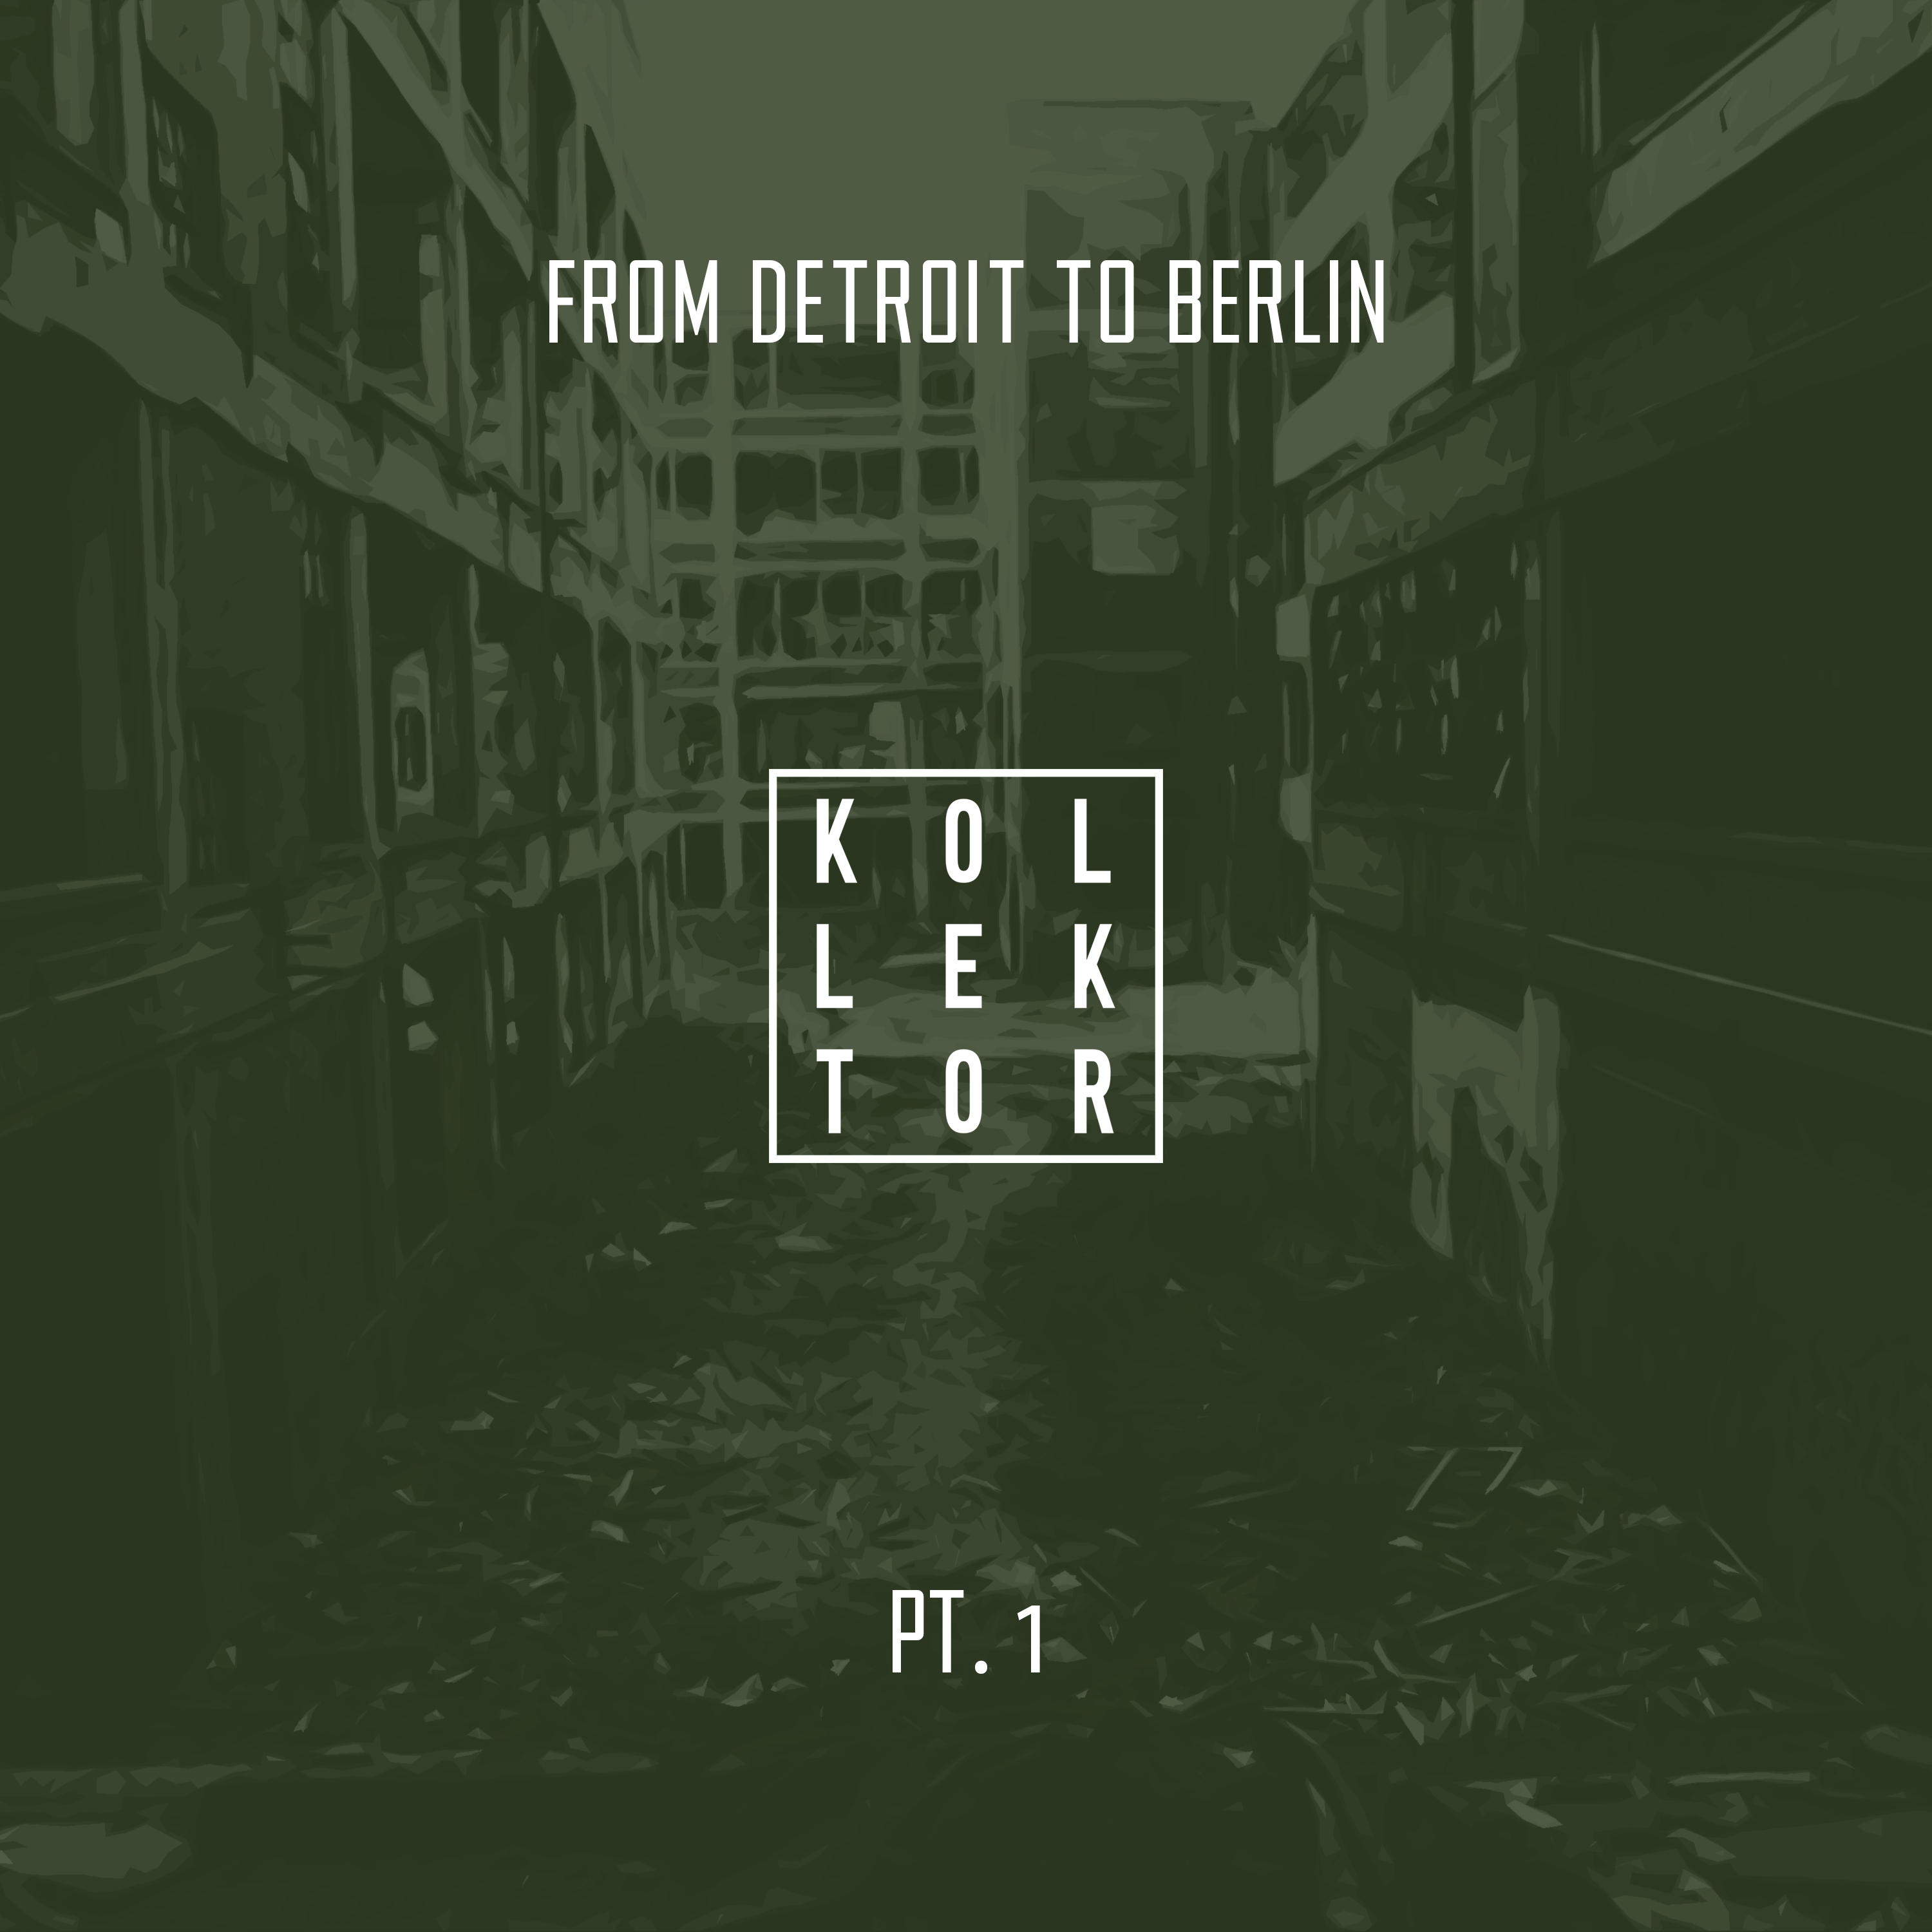 From Detroit to Berlin Pt. 1